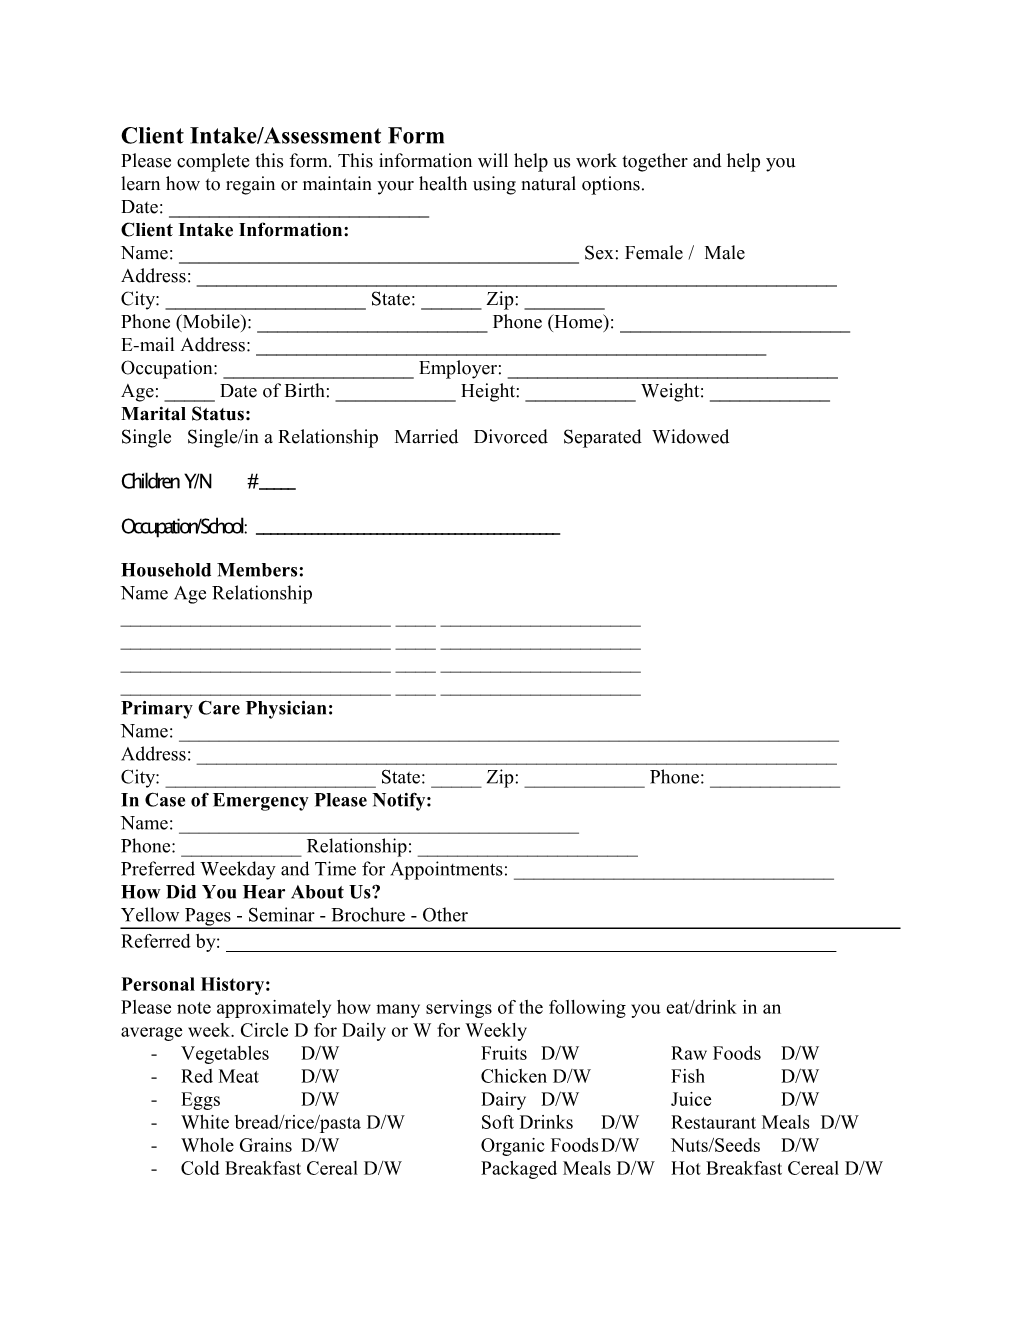 Client Intake/Assessment Form